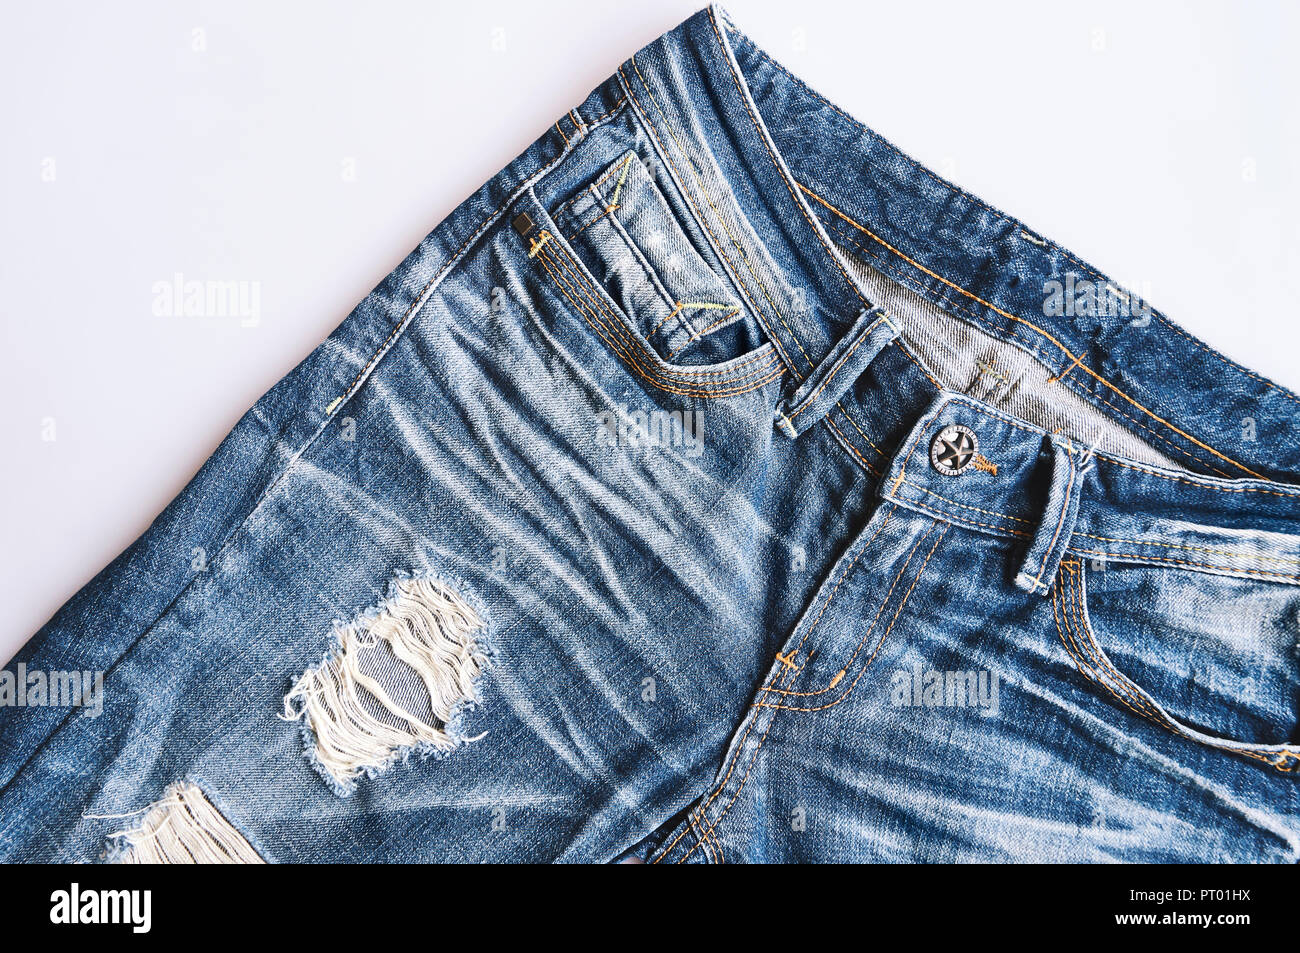 Destroyed Denim High Resolution Stock Photography and Images - Alamy